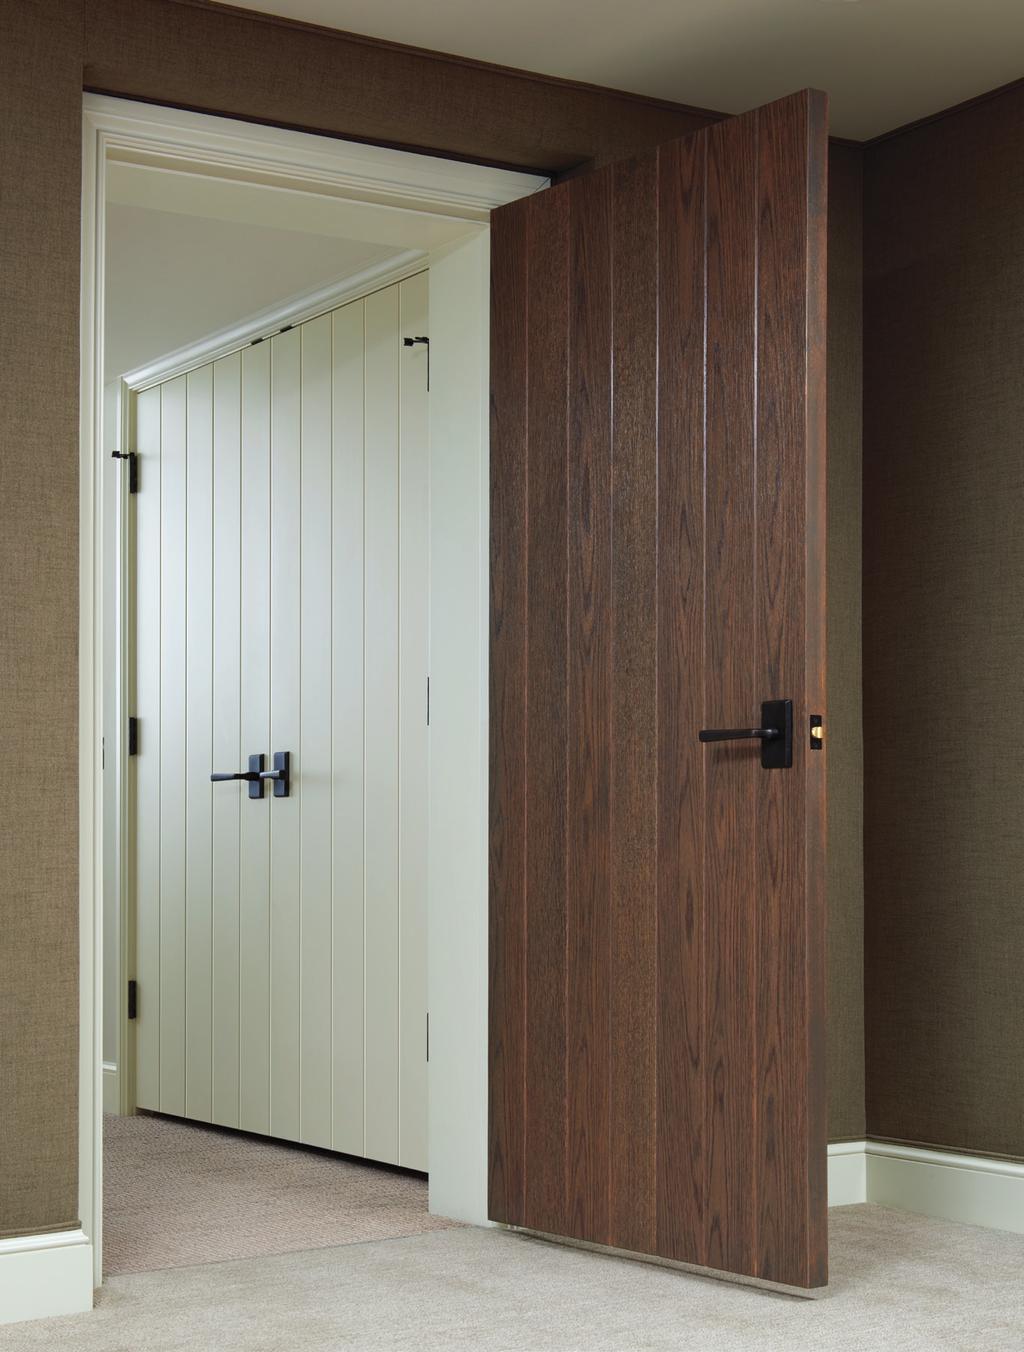 Fully customize your look with applied moulding, split styles and panel substitutions such as the mirror added to this pocket door in the boys room (shown right).